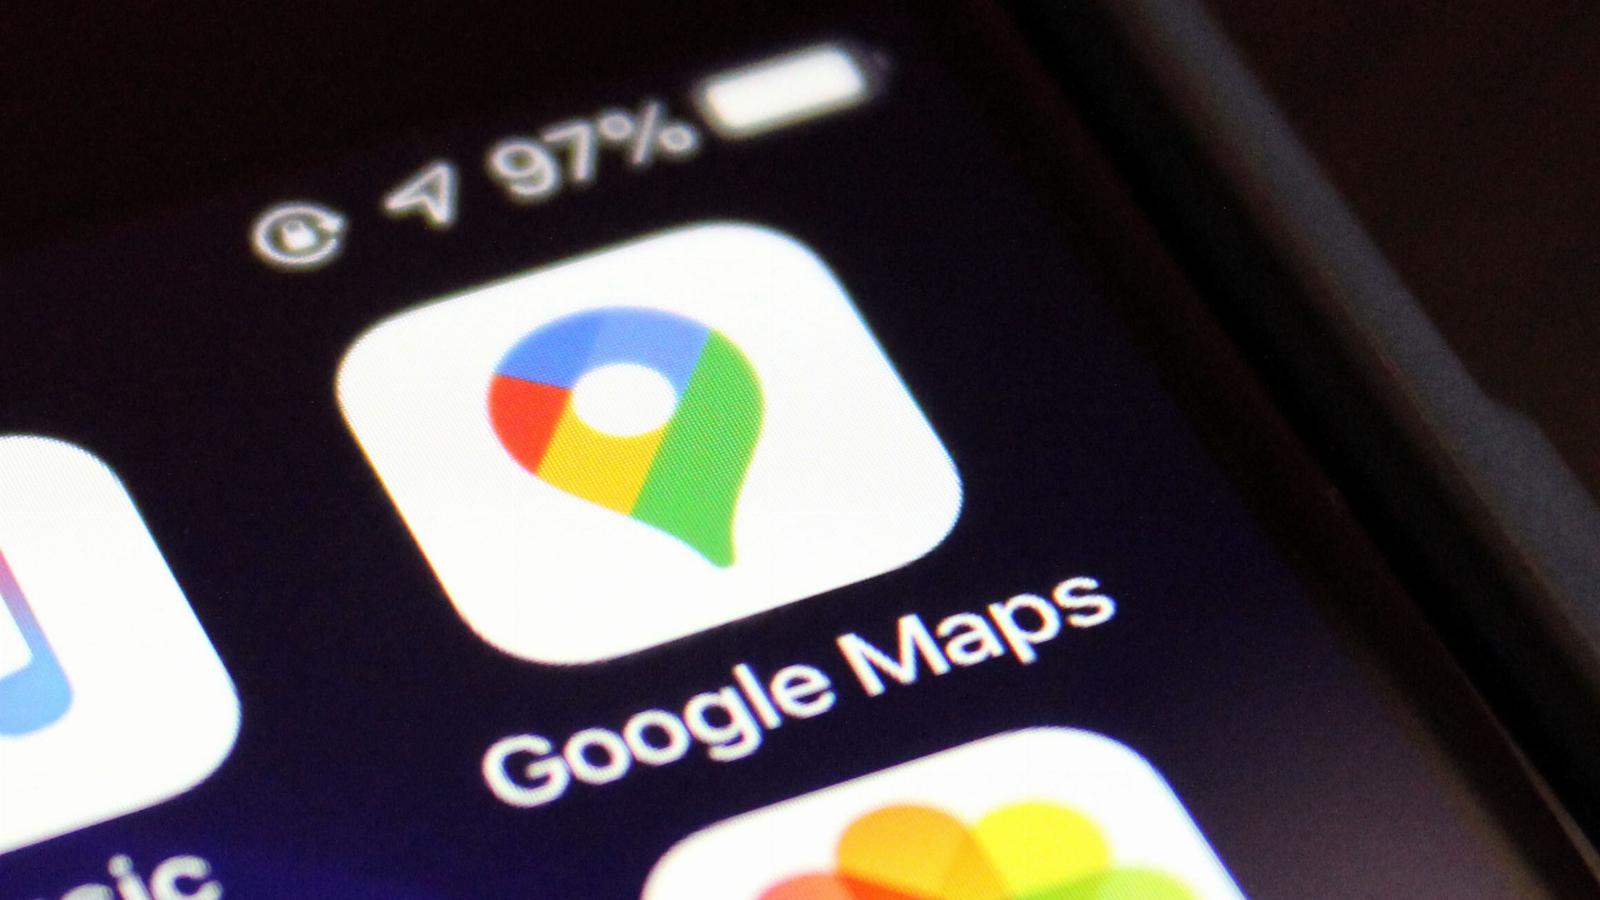 Google Maps is adding new features to make it easier to explore national parks